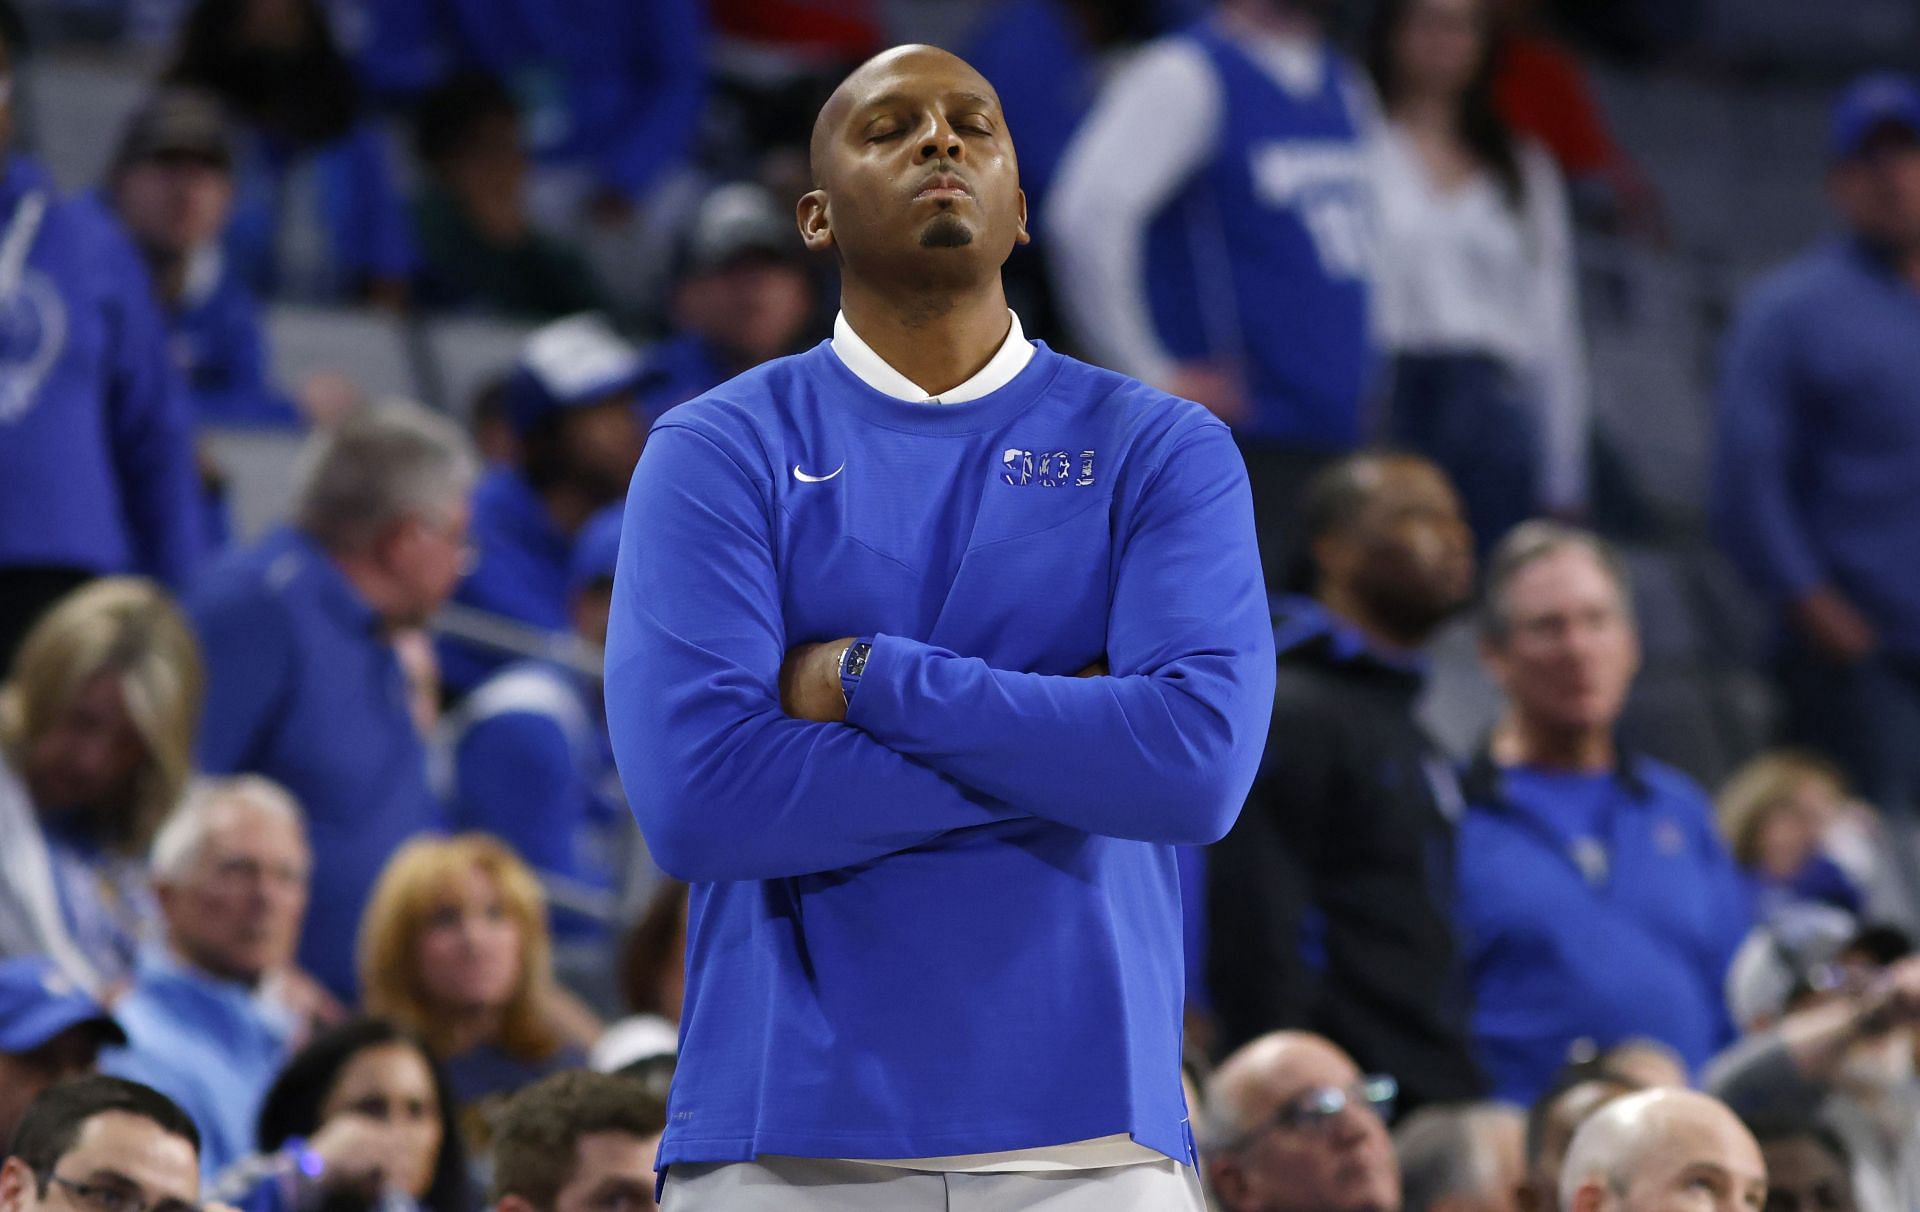 Penny Hardaway was suspended for recruiting violations by the NCAA